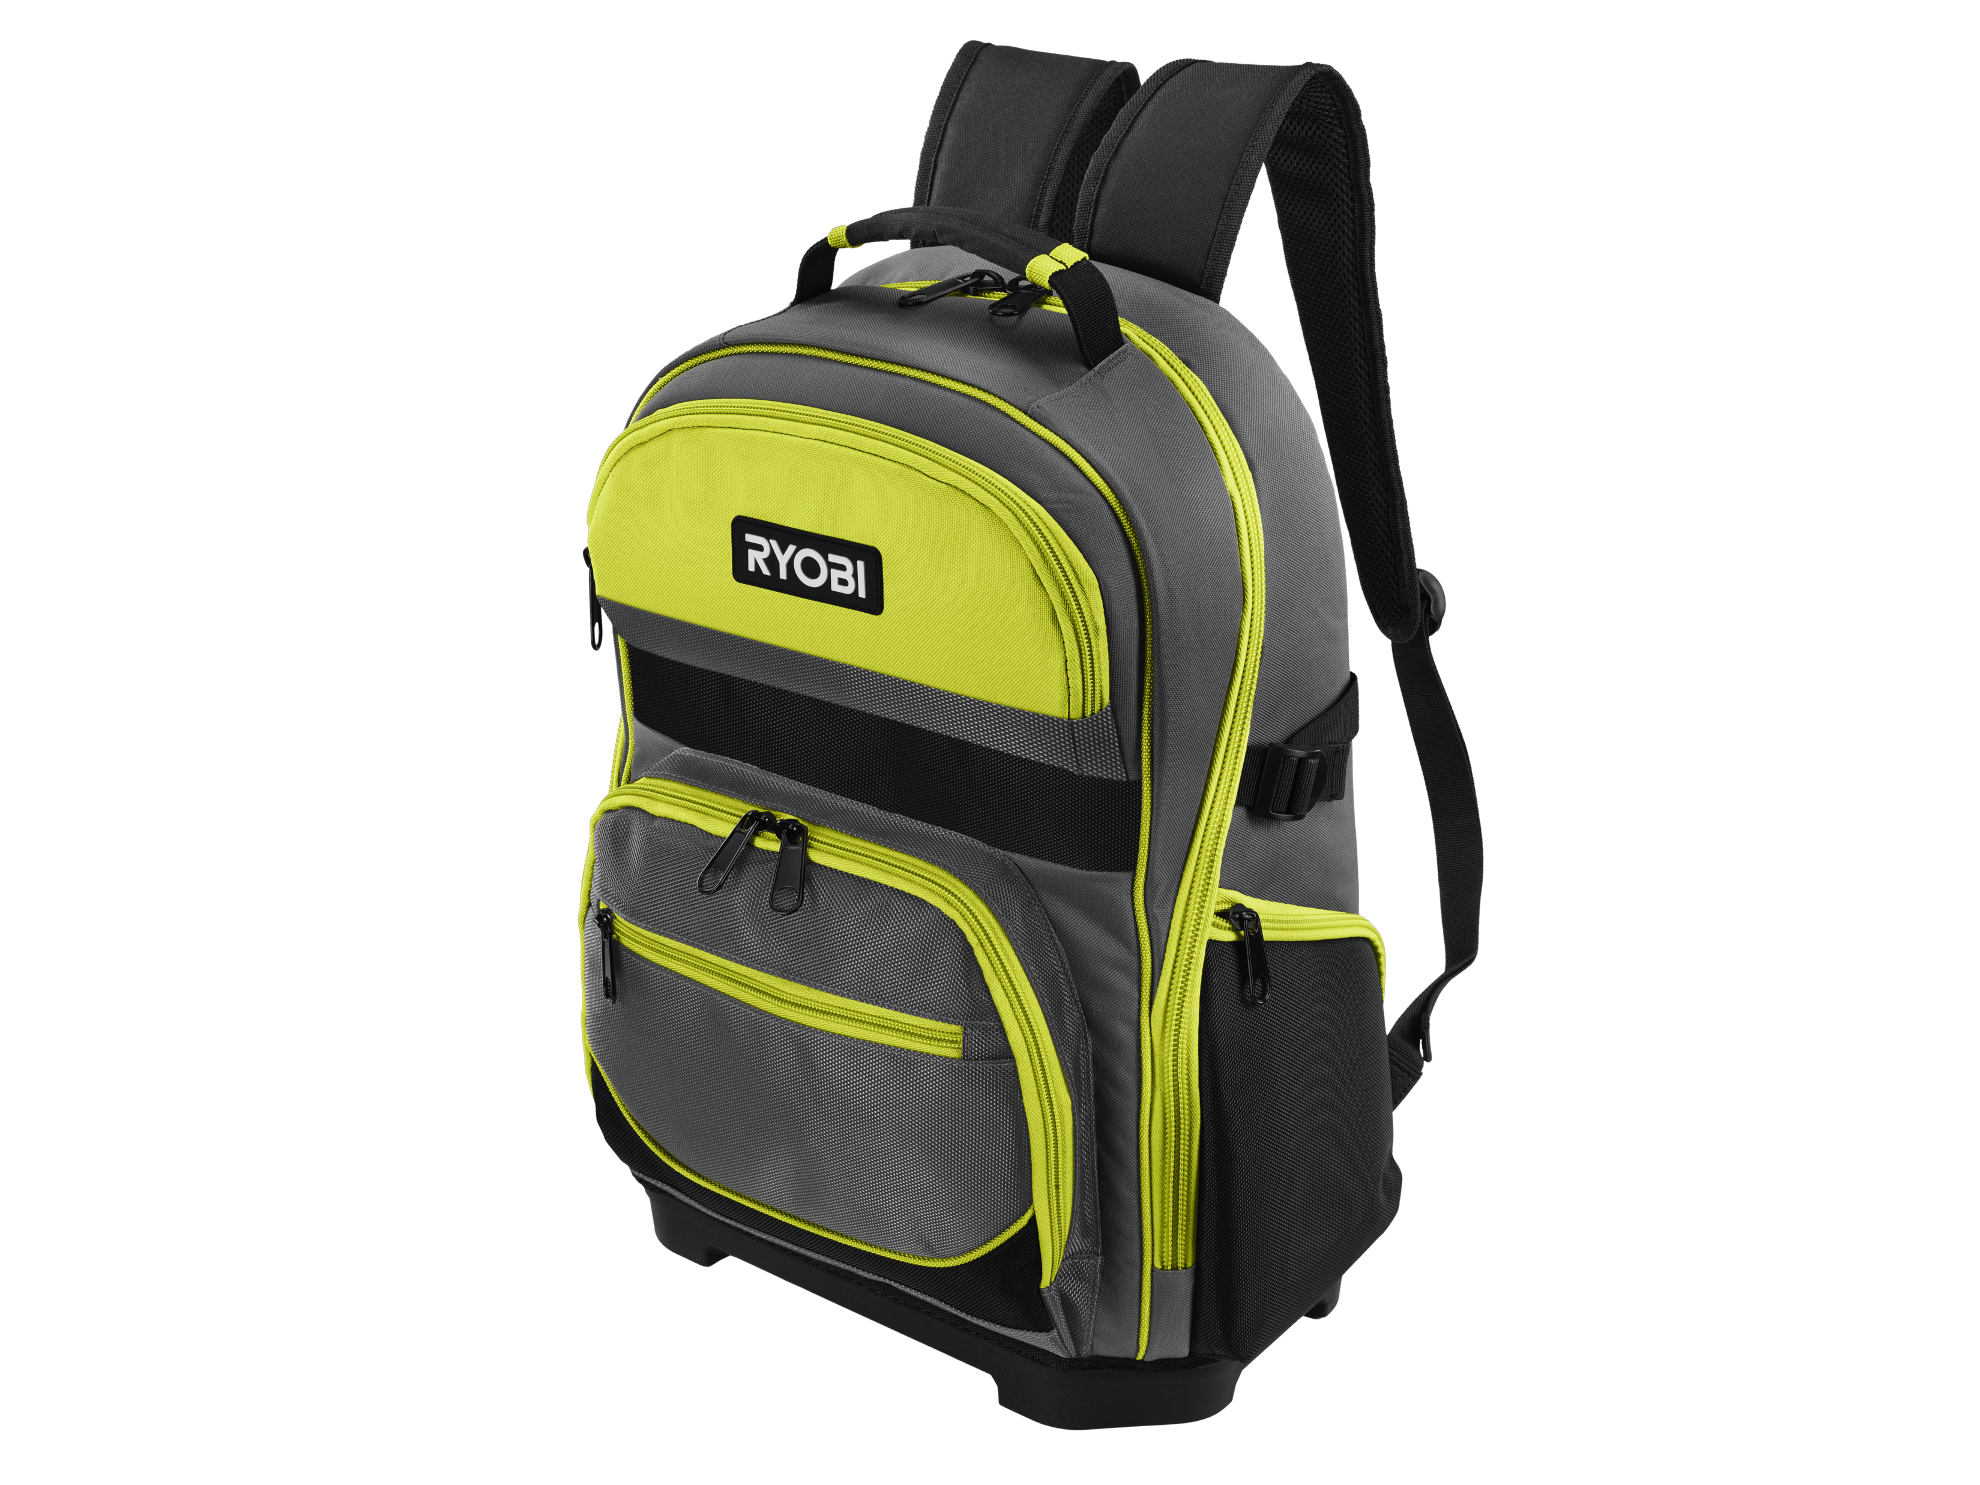 16" Backpack with Tool Organizer